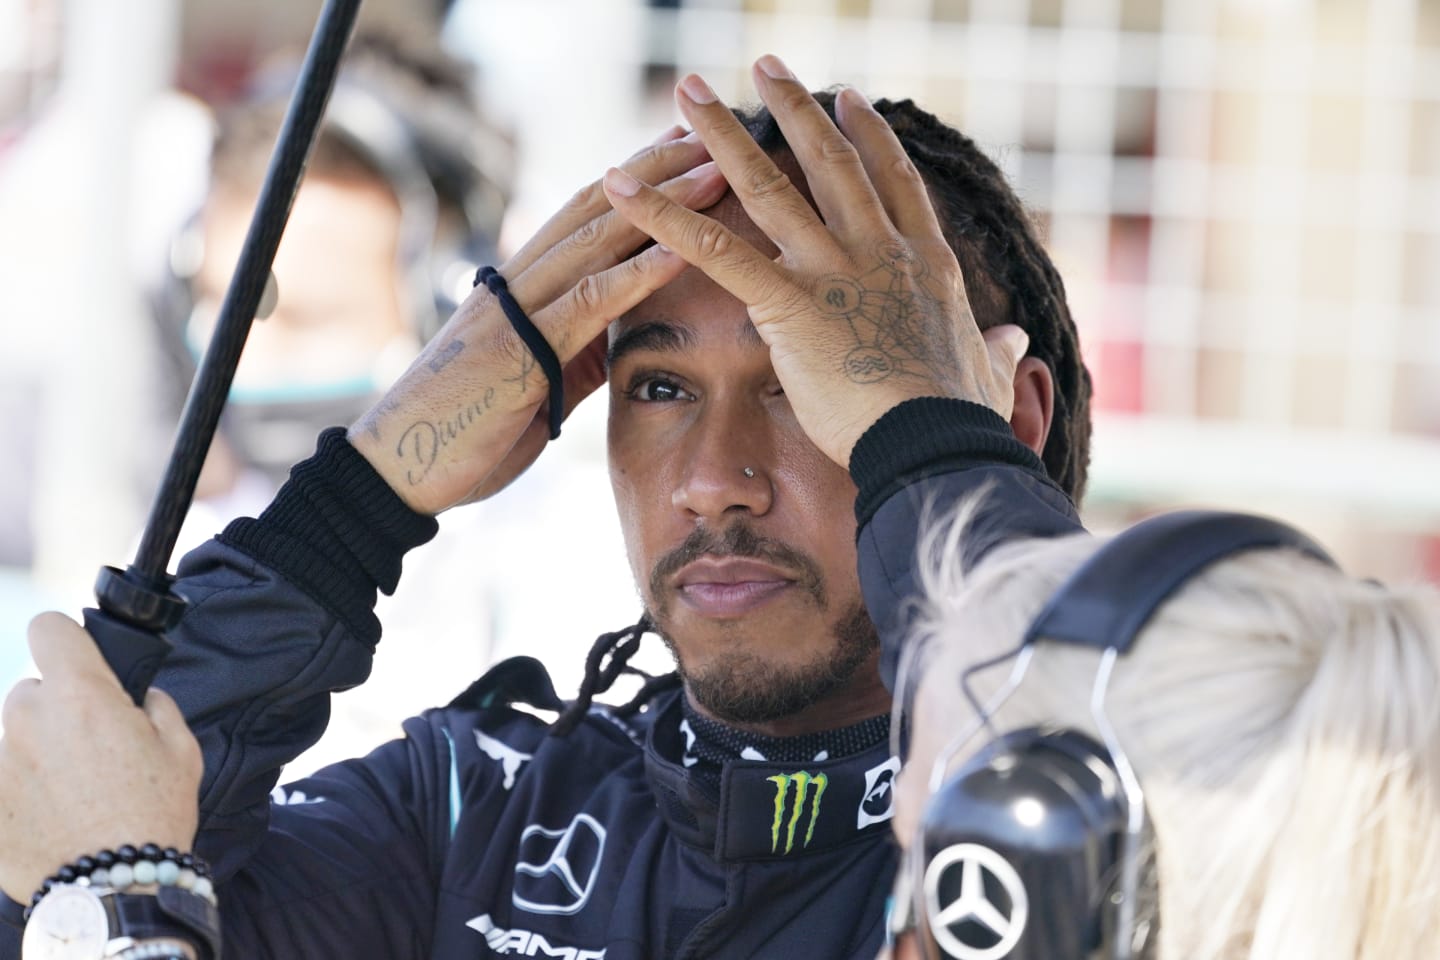 AUSTIN, TEXAS - OCTOBER 24: Lewis Hamilton of Great Britain and Mercedes GP prepares to drive on